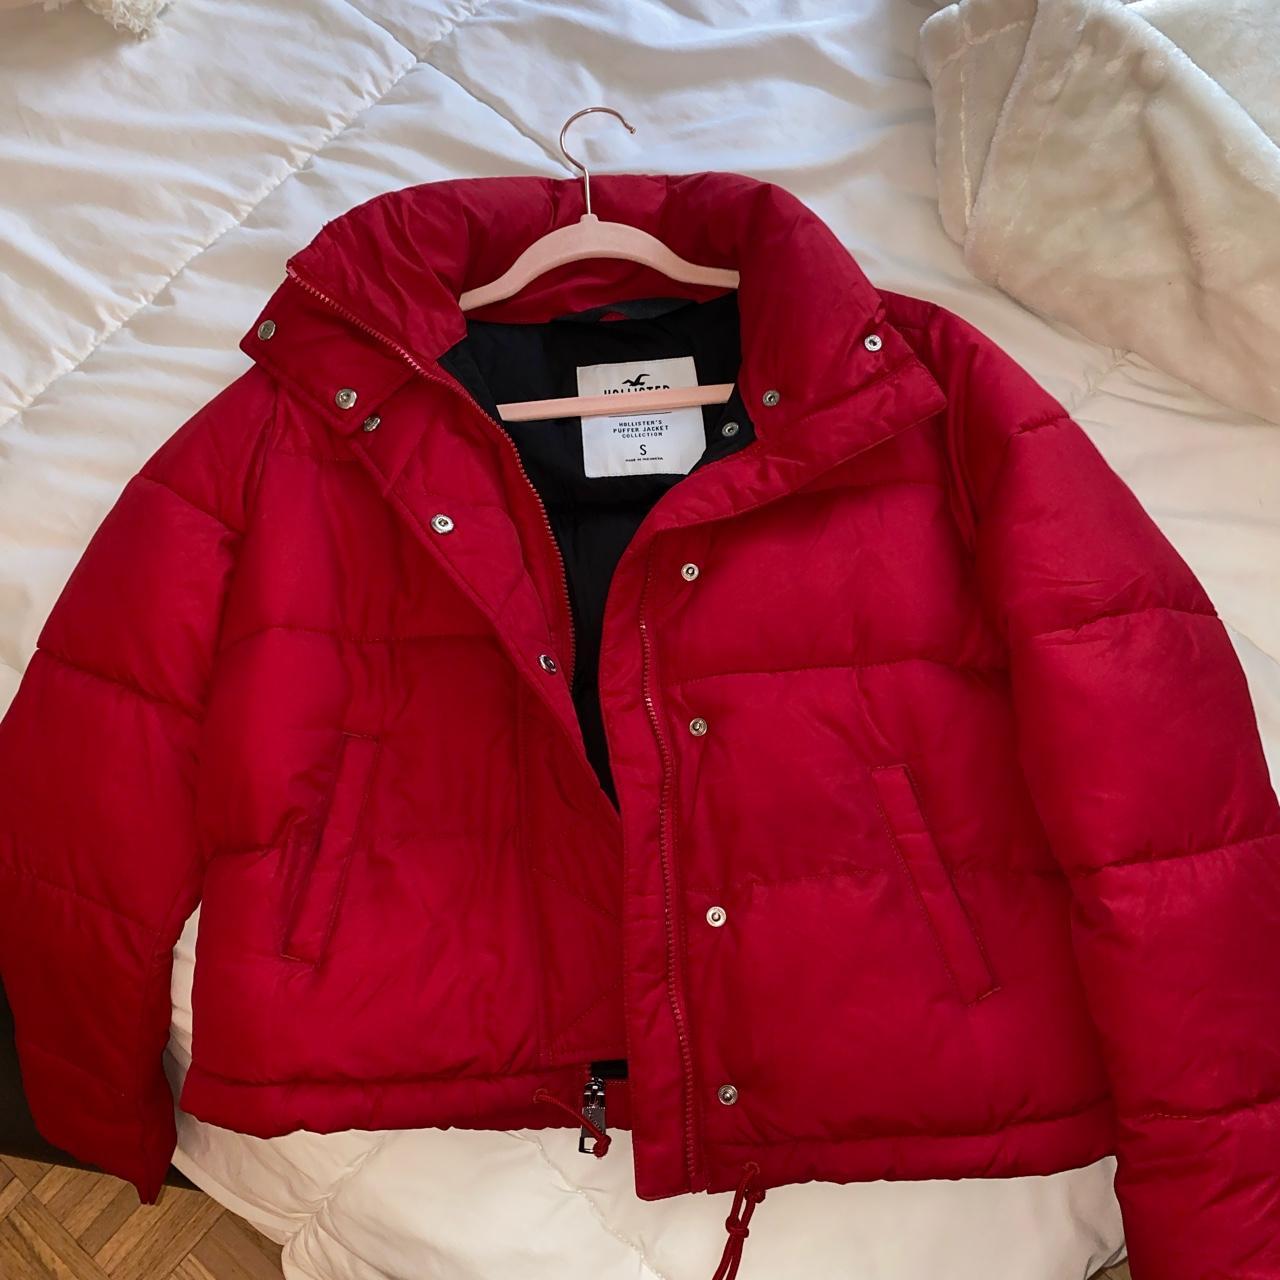 Hollister All Weather Hooded Jacket Fleece Lined In Hco Red